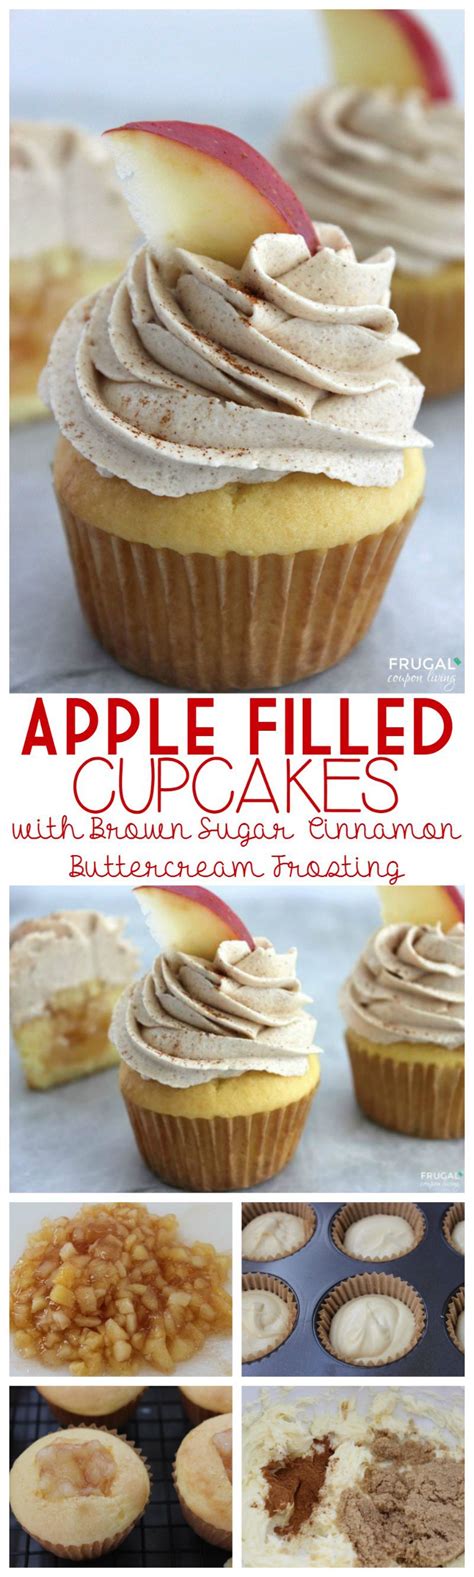 Apple Filled Cupcakes With Brown Sugar Cinnamon Buttercream Homemade